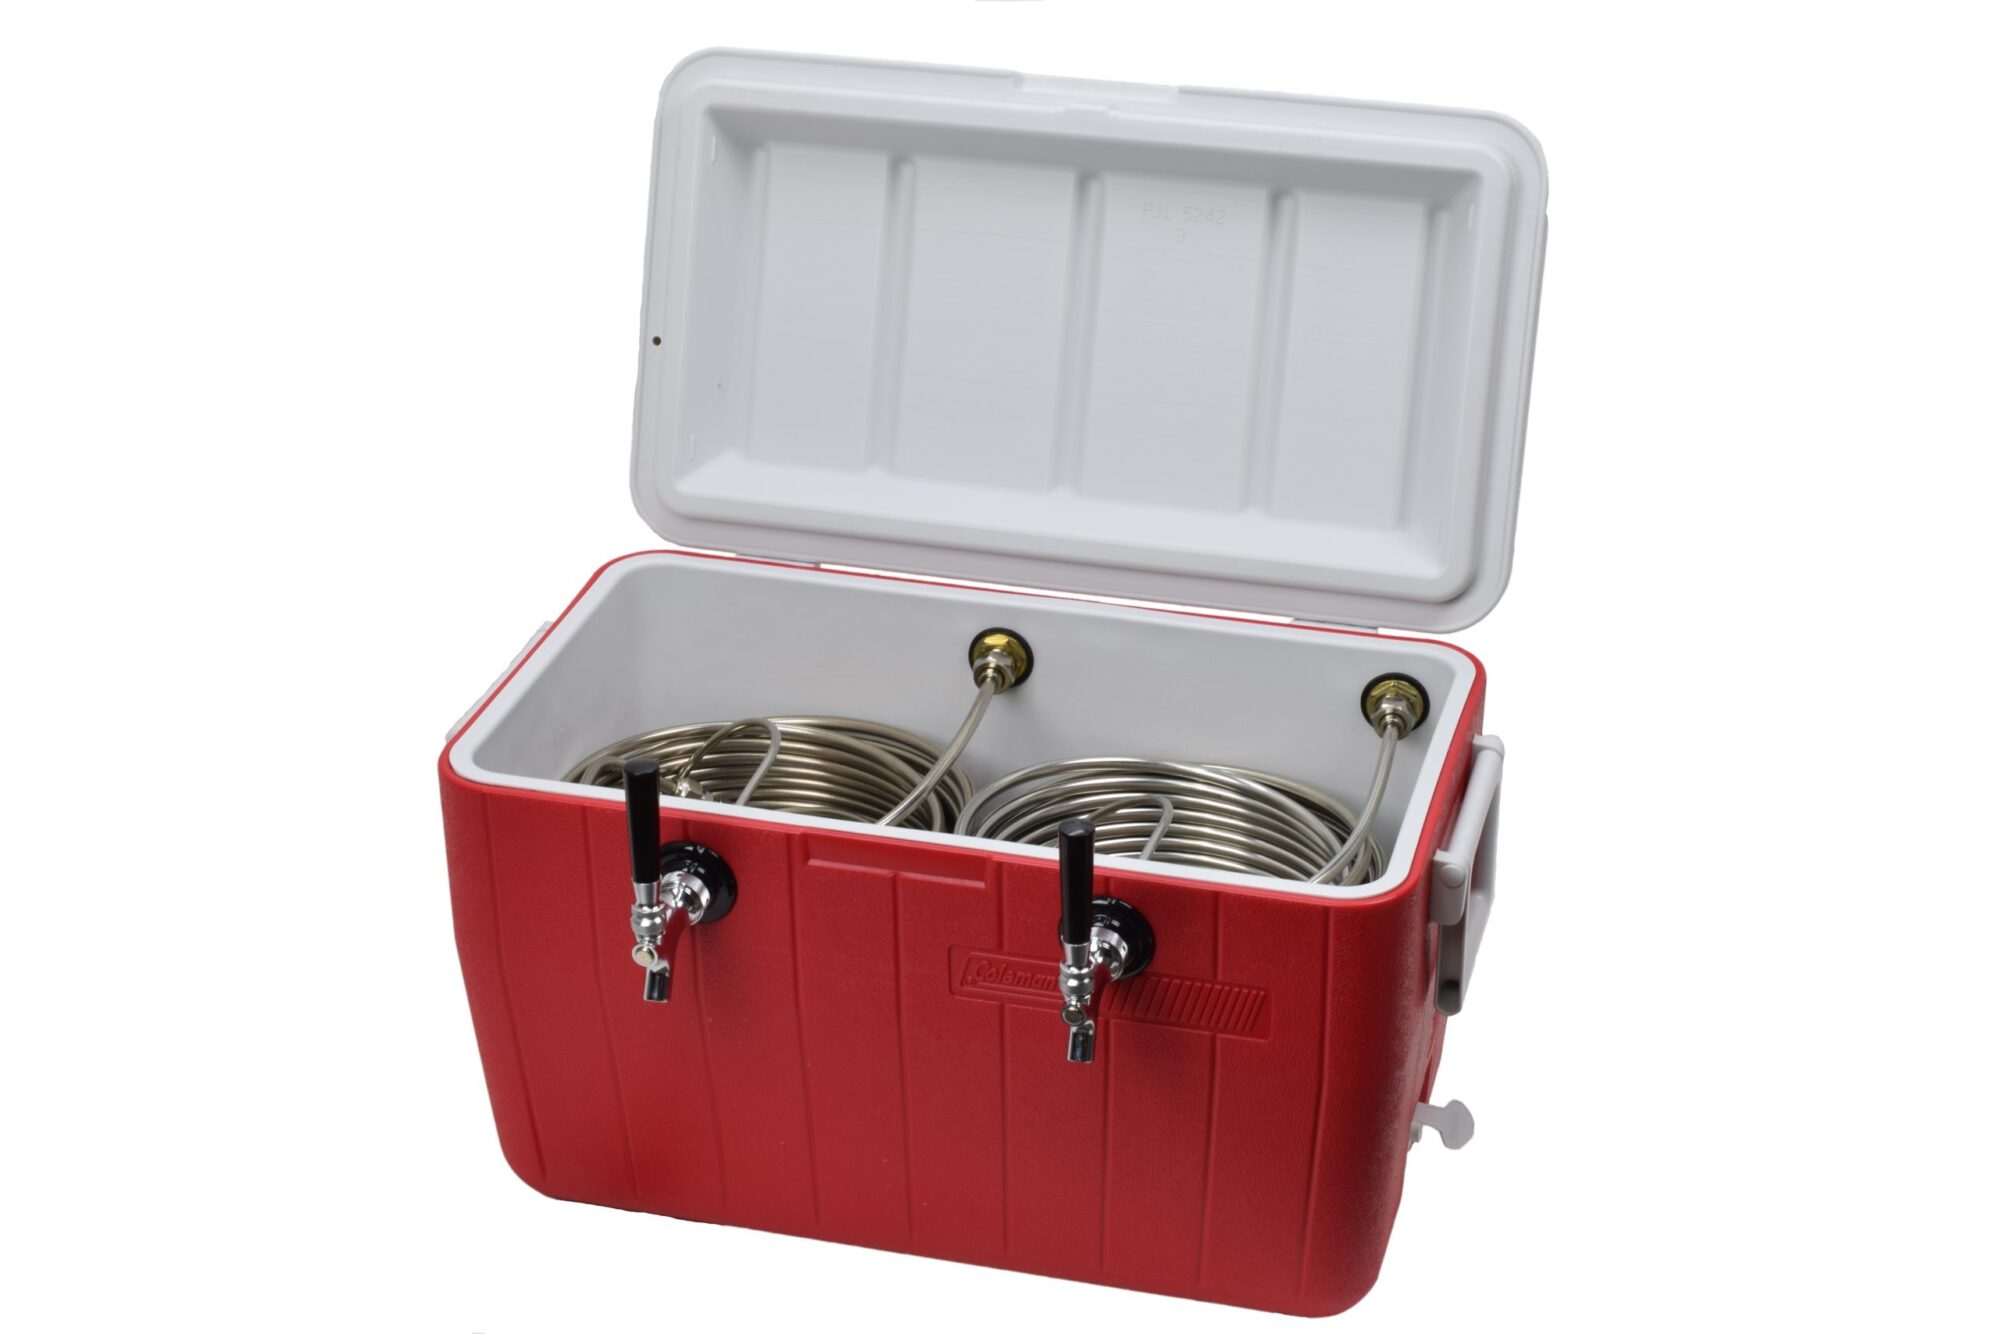 811B-20SS Two Product 48qt Cooler with 120' Stainless Steel Coils - All SS Contact